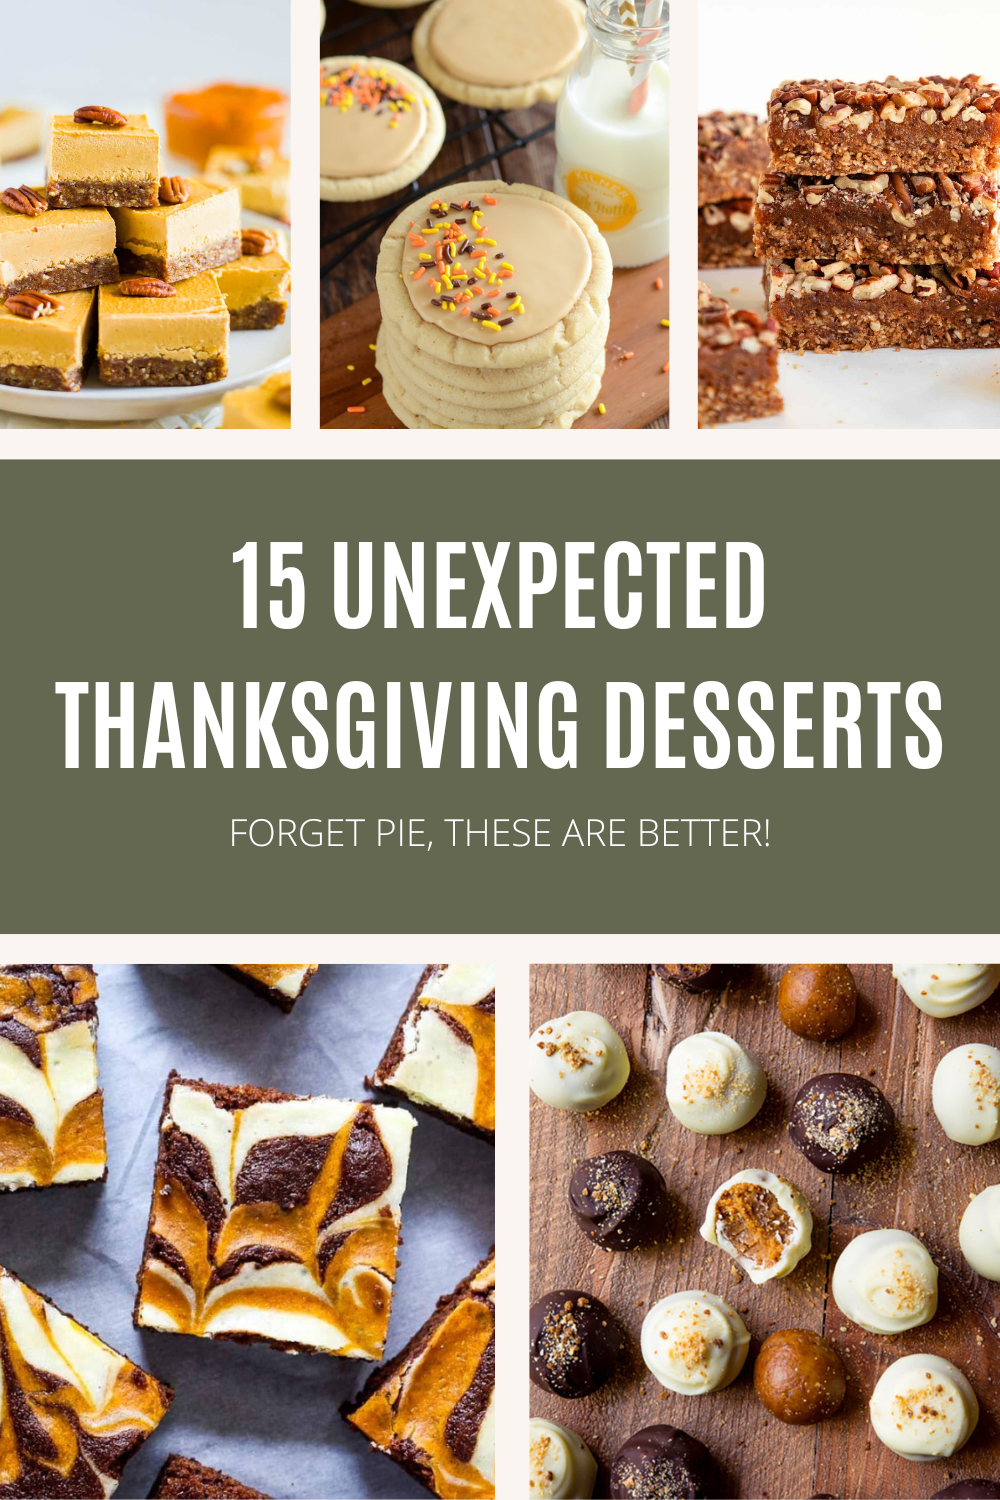 15 Unexpected Thanksgiving Desserts Recipes to Try | TheFoxandShe.com